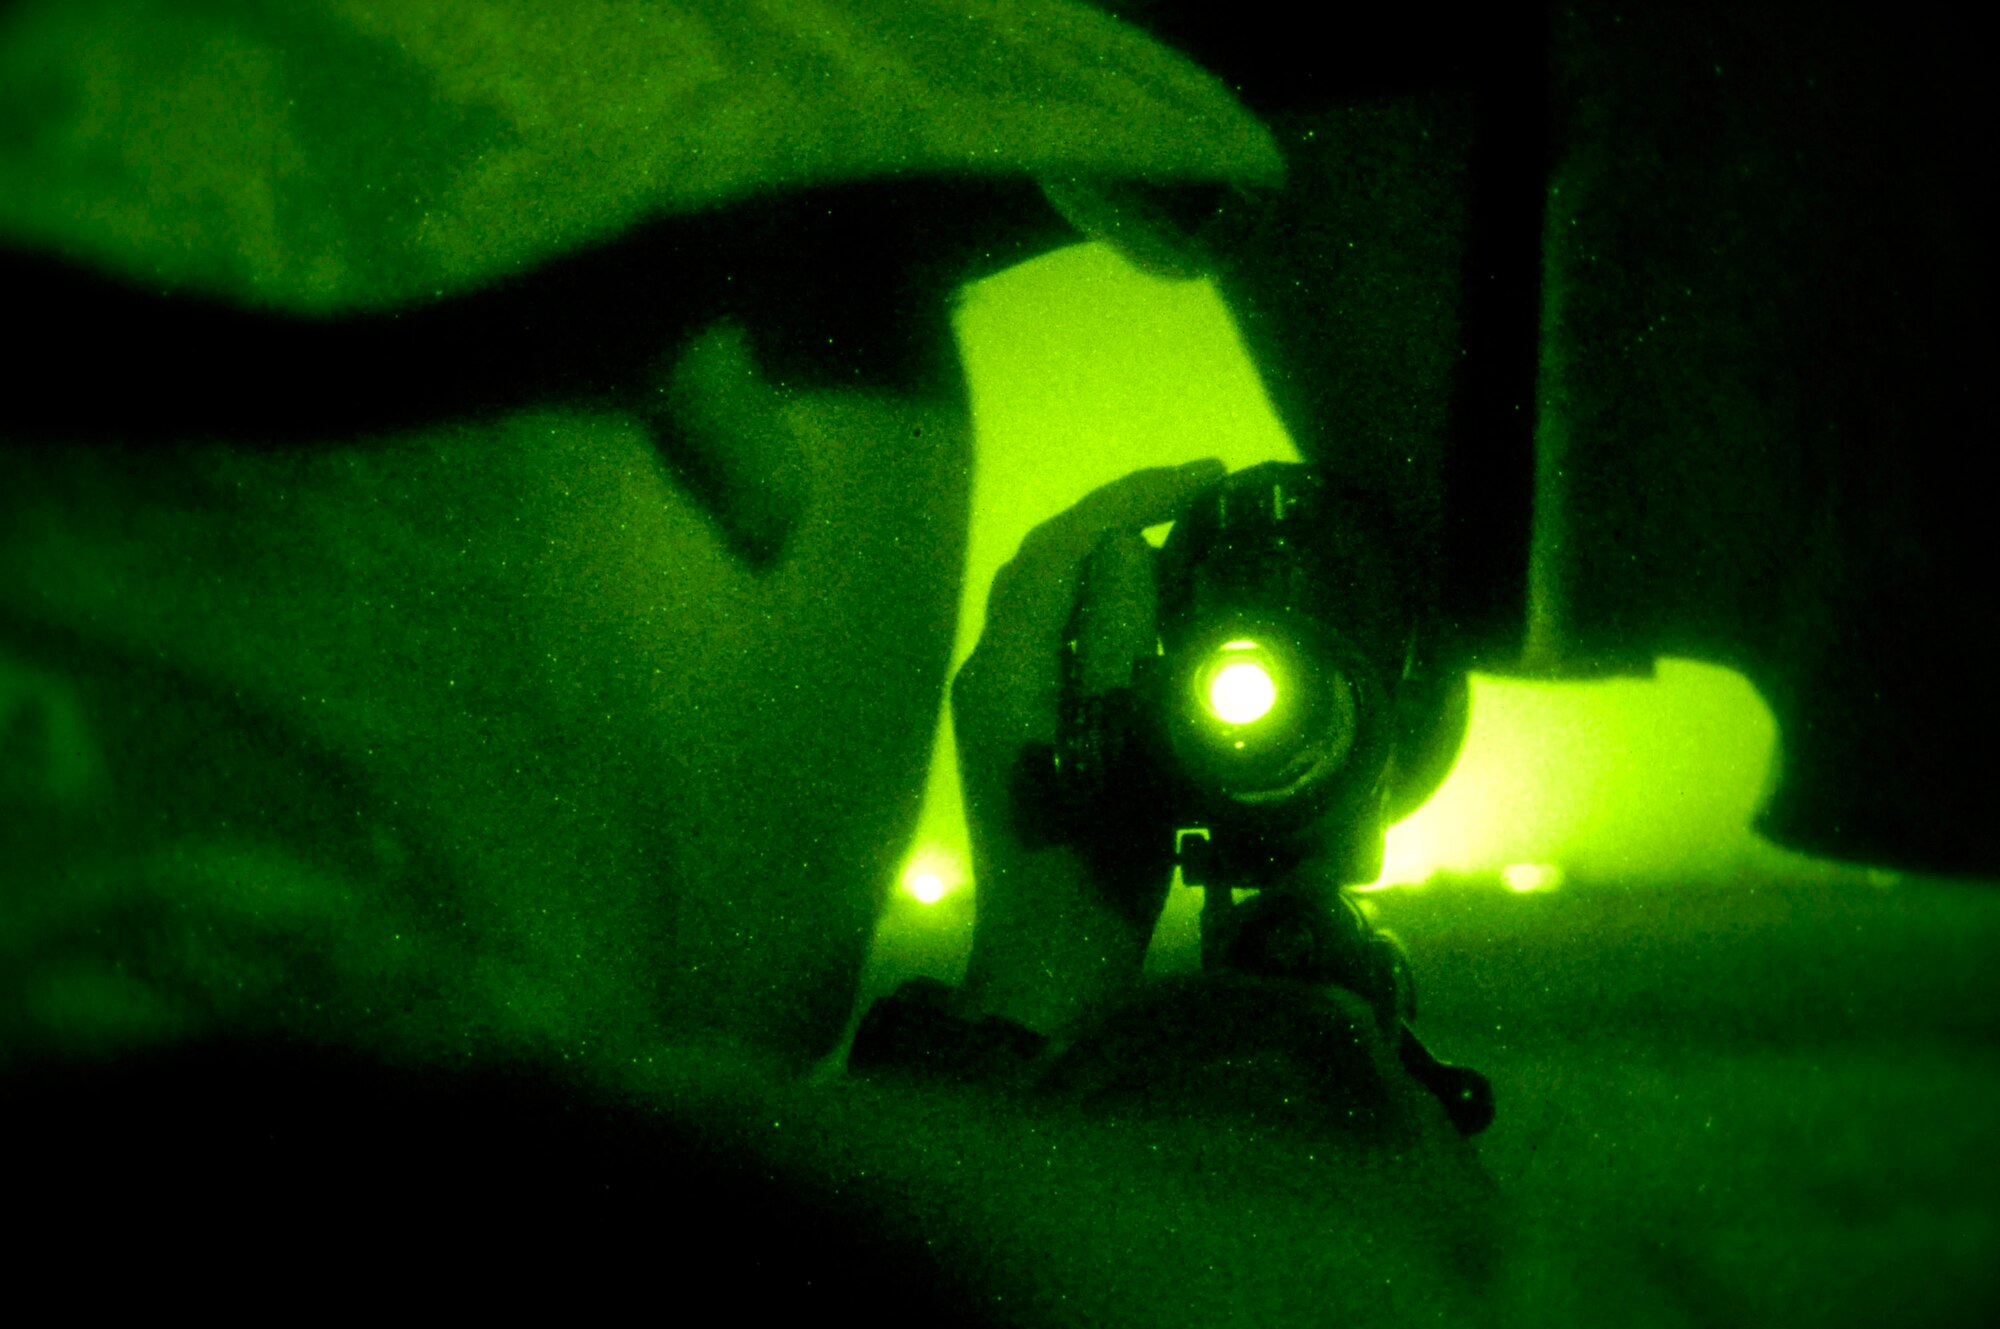 Staff Sgt. Curtis Huffman sets his sites while on top of a lookout point where his sniper team has set up surveillance for terrorist activity Nov. 14 in Iraq. The 506th Expeditionary Security Forces Squadron at Kirkuk Air Base, Iraq, houses a close precision engagement team of Air Force snipers who train as anti-sniper teams to target terrorist and insurgent snipers attacking U.S. and coalition forces in the area. Sergeant Huffman is from the 354th Security Forces Squadron at Eielson Air Force Base, Alaska, deployed to Kirkuk Air Base, Iraq, as a member of the 506th Expeditionary Security Forces Squadron. (U.S. Air Force photo/Staff Sgt. Angelique Perez) 
